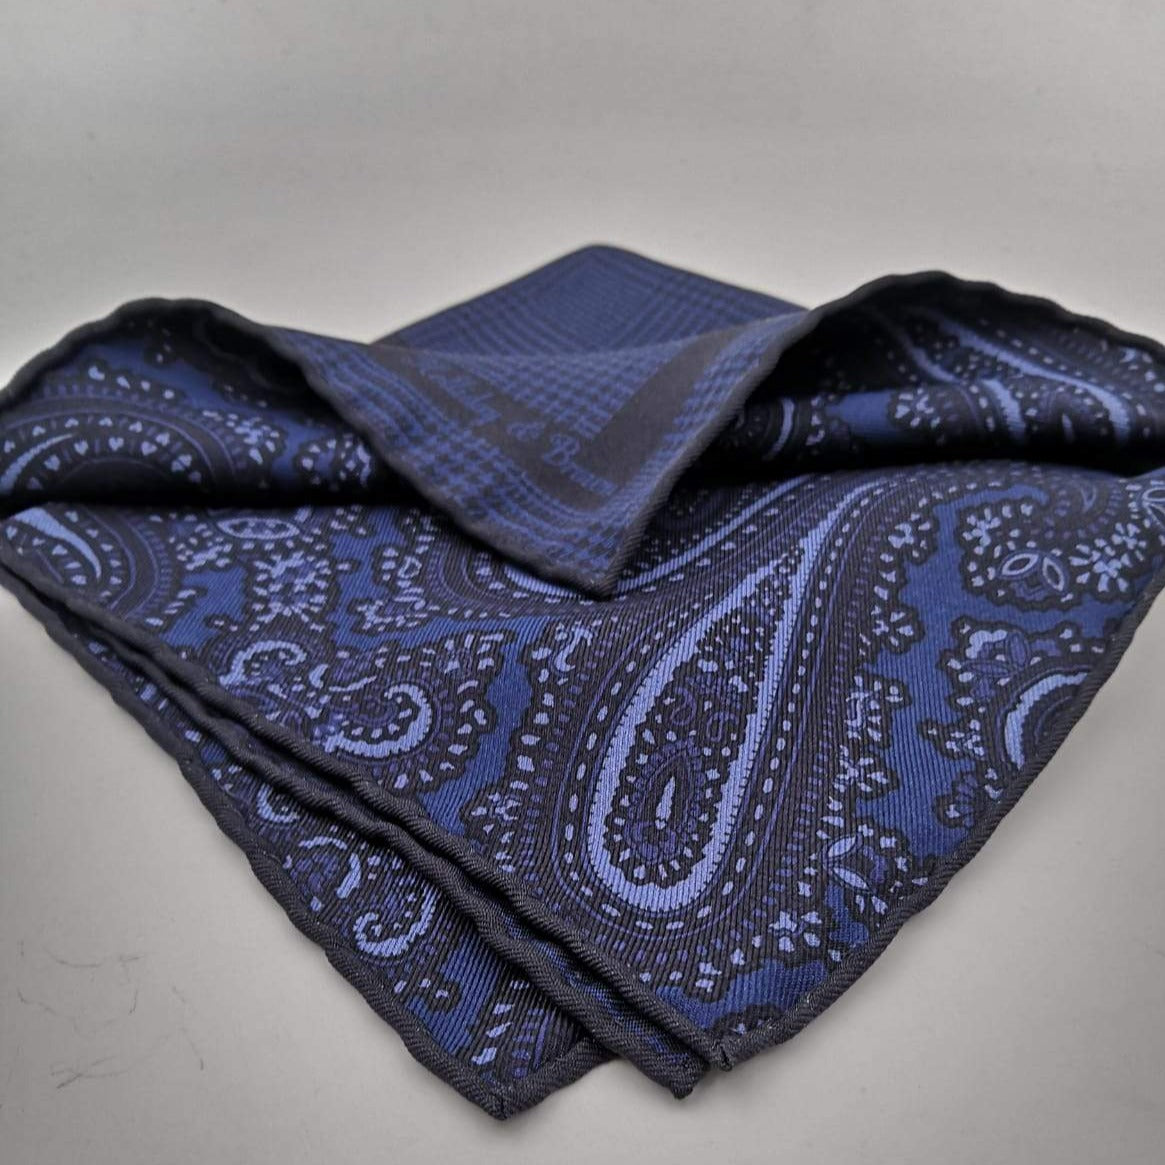 Holliday & Brown Hand-rolled   Holliday & Brown for Cruciani & Bella 100% Silk Dark Blue and Navy Blue Double Faces Patterned  Motif  Pocket Square Handmade in Italy 32 cm X 32 cm #5765